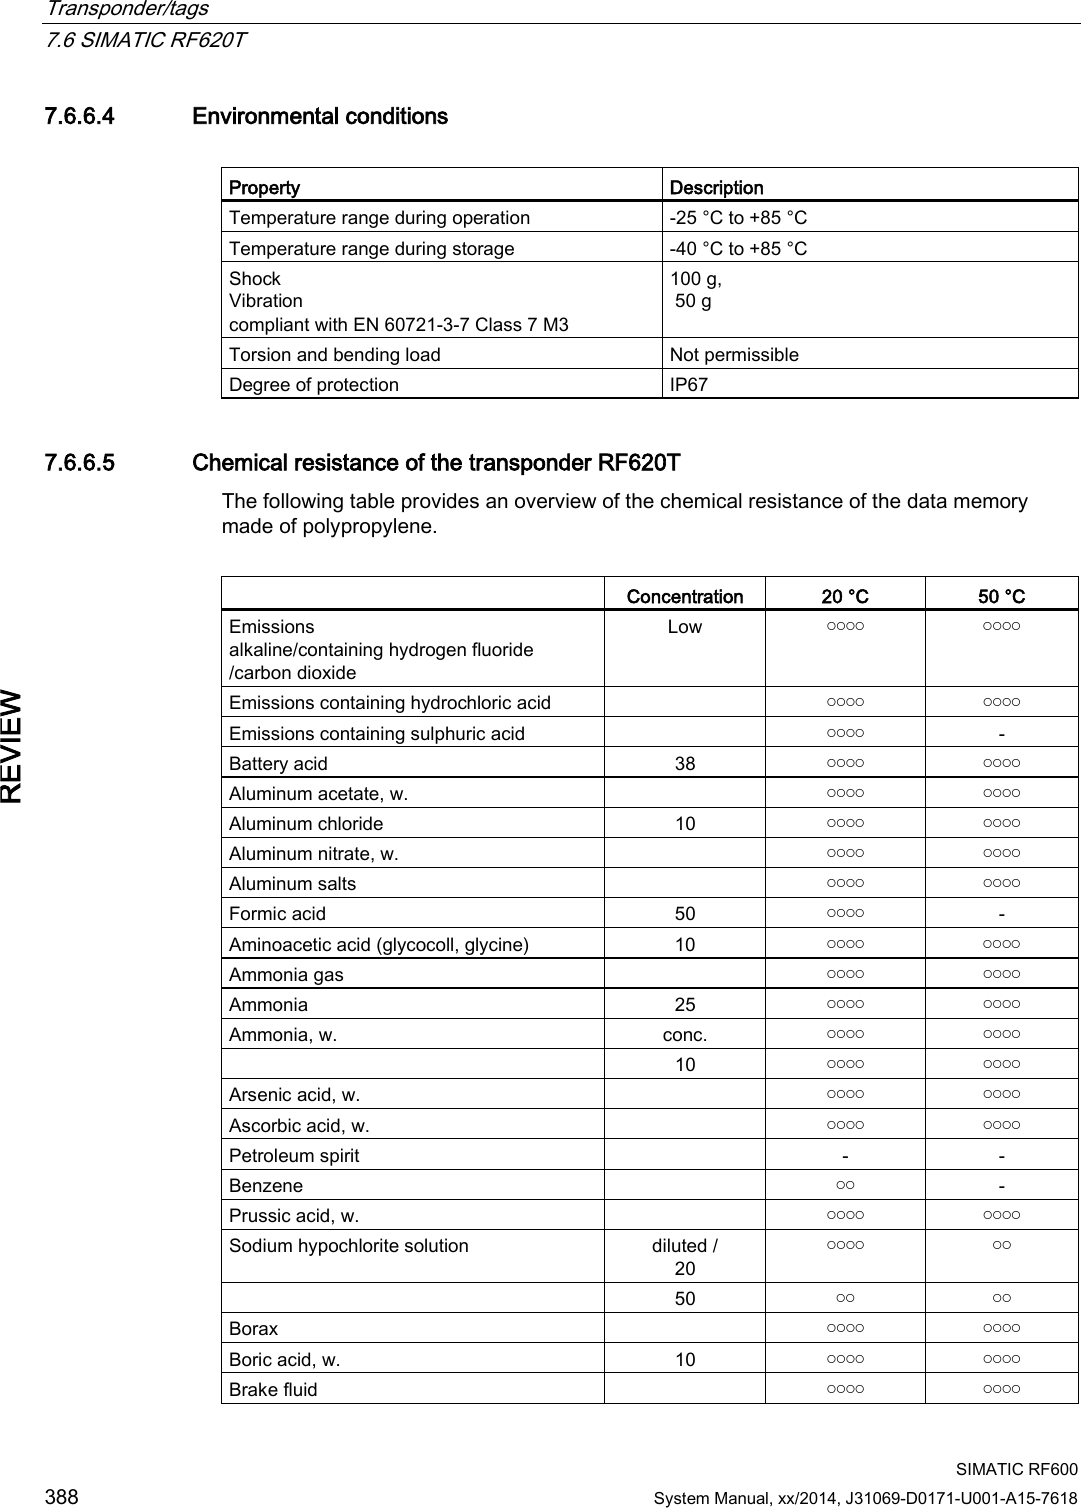 Transponder/tags   7.6 SIMATIC RF620T  SIMATIC RF600 388 System Manual, xx/2014, J31069-D0171-U001-A15-7618 REVIEW 7.6.6.4 Environmental conditions  Property Description Temperature range during operation -25 °C to +85 °C Temperature range during storage -40 °C to +85 °C Shock Vibration compliant with EN 60721-3-7 Class 7 M3 100 g,   50 g Torsion and bending load Not permissible  Degree of protection IP67 7.6.6.5 Chemical resistance of the transponder RF620T The following table provides an overview of the chemical resistance of the data memory made of polypropylene.    Concentration 20 °C 50 °C Emissions  alkaline/containing hydrogen fluoride /carbon dioxide Low ￮￮￮￮ ￮￮￮￮ Emissions containing hydrochloric acid  ￮￮￮￮ ￮￮￮￮ Emissions containing sulphuric acid  ￮￮￮￮ - Battery acid 38 ￮￮￮￮ ￮￮￮￮ Aluminum acetate, w.  ￮￮￮￮ ￮￮￮￮ Aluminum chloride 10 ￮￮￮￮ ￮￮￮￮ Aluminum nitrate, w.  ￮￮￮￮ ￮￮￮￮ Aluminum salts  ￮￮￮￮ ￮￮￮￮ Formic acid 50 ￮￮￮￮ - Aminoacetic acid (glycocoll, glycine) 10 ￮￮￮￮ ￮￮￮￮ Ammonia gas  ￮￮￮￮ ￮￮￮￮ Ammonia 25 ￮￮￮￮ ￮￮￮￮ Ammonia, w. conc. ￮￮￮￮ ￮￮￮￮  10 ￮￮￮￮ ￮￮￮￮ Arsenic acid, w.  ￮￮￮￮ ￮￮￮￮ Ascorbic acid, w.  ￮￮￮￮ ￮￮￮￮ Petroleum spirit  - - Benzene  ￮￮ - Prussic acid, w.  ￮￮￮￮ ￮￮￮￮ Sodium hypochlorite solution  diluted /  20 ￮￮￮￮ ￮￮  50 ￮￮ ￮￮ Borax  ￮￮￮￮ ￮￮￮￮ Boric acid, w. 10 ￮￮￮￮ ￮￮￮￮ Brake fluid  ￮￮￮￮ ￮￮￮￮ 